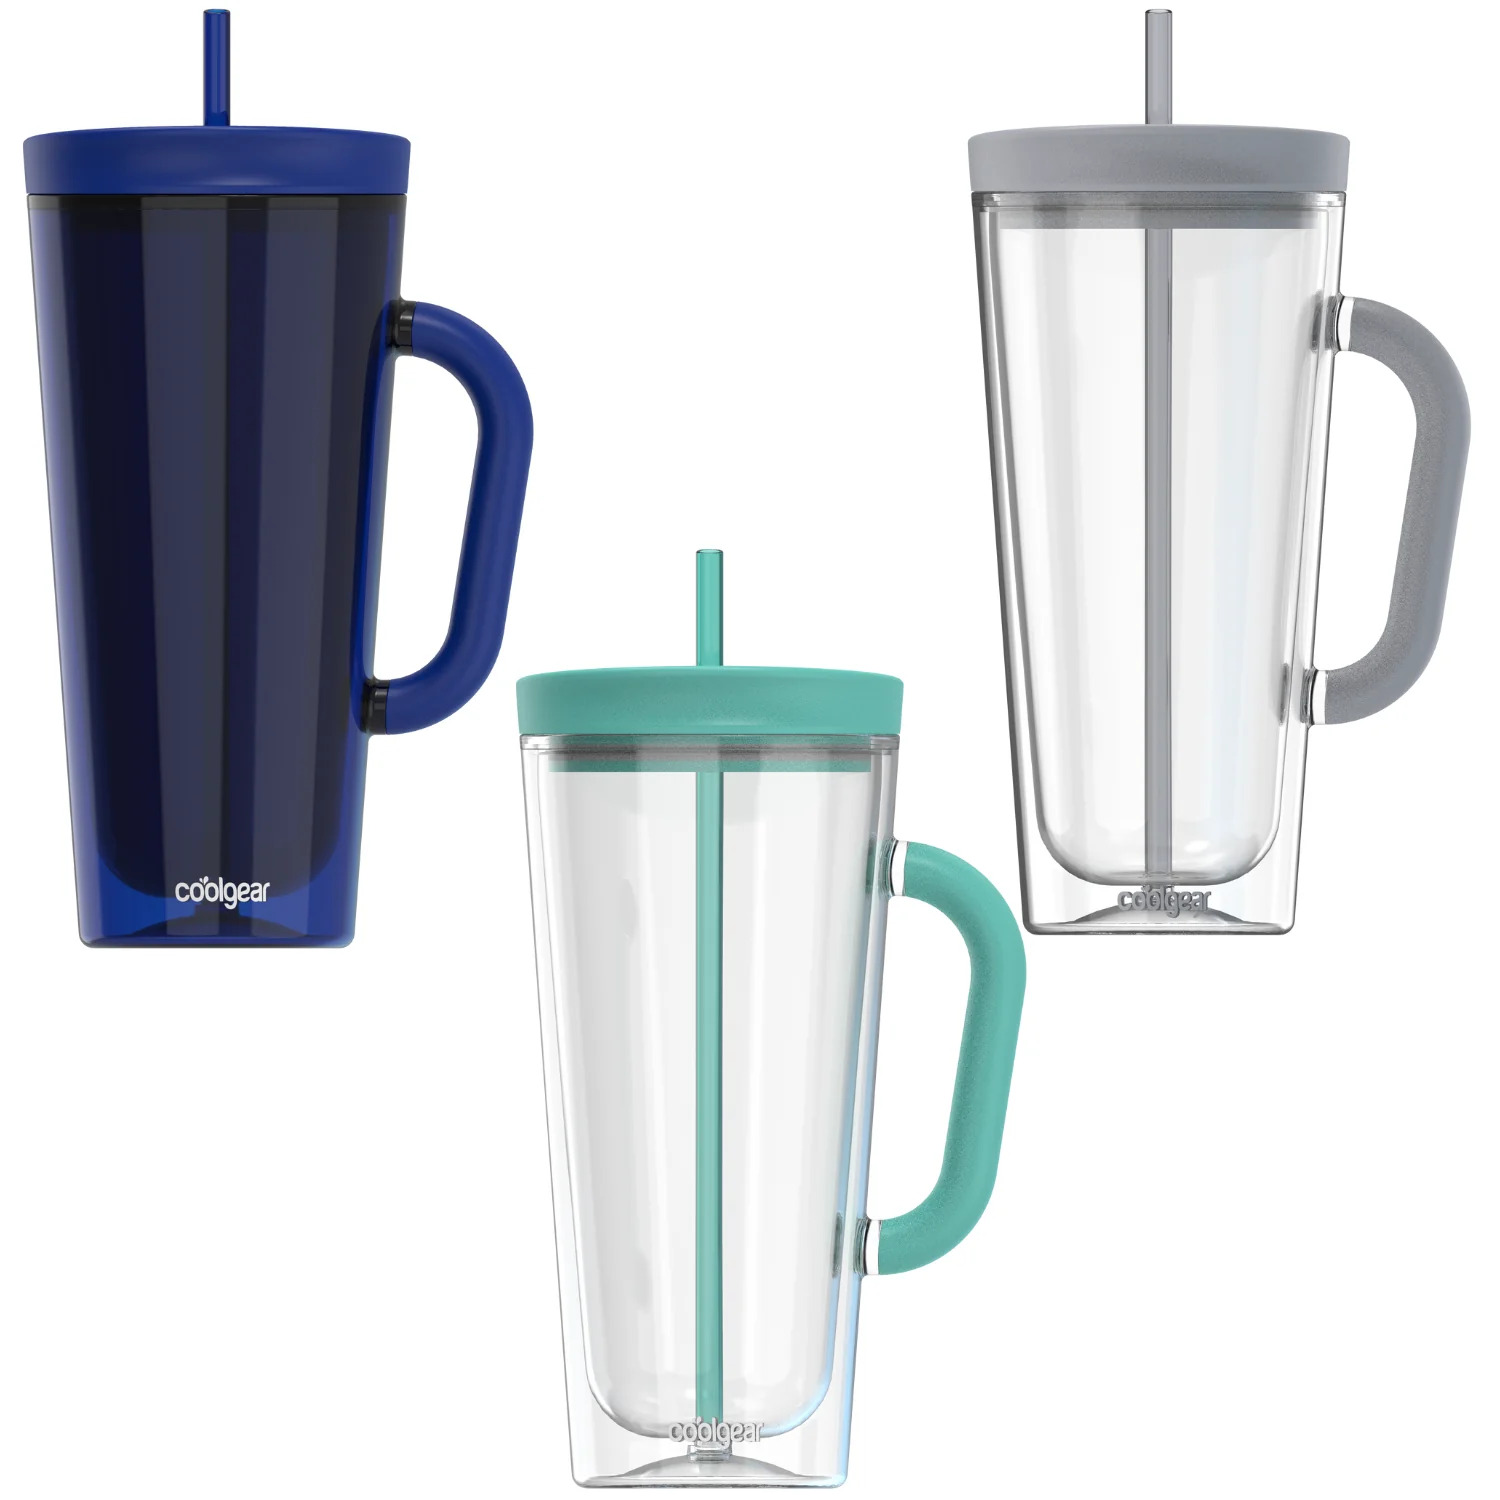 COOL GEAR 3-Pack 26 oz Spritz Tumbler with Straw and Handle | Dual Function Closure, Colored Re-Usable Tumbler Water Bottle with Straw and Handle - Variety Pack - image 1 of 4